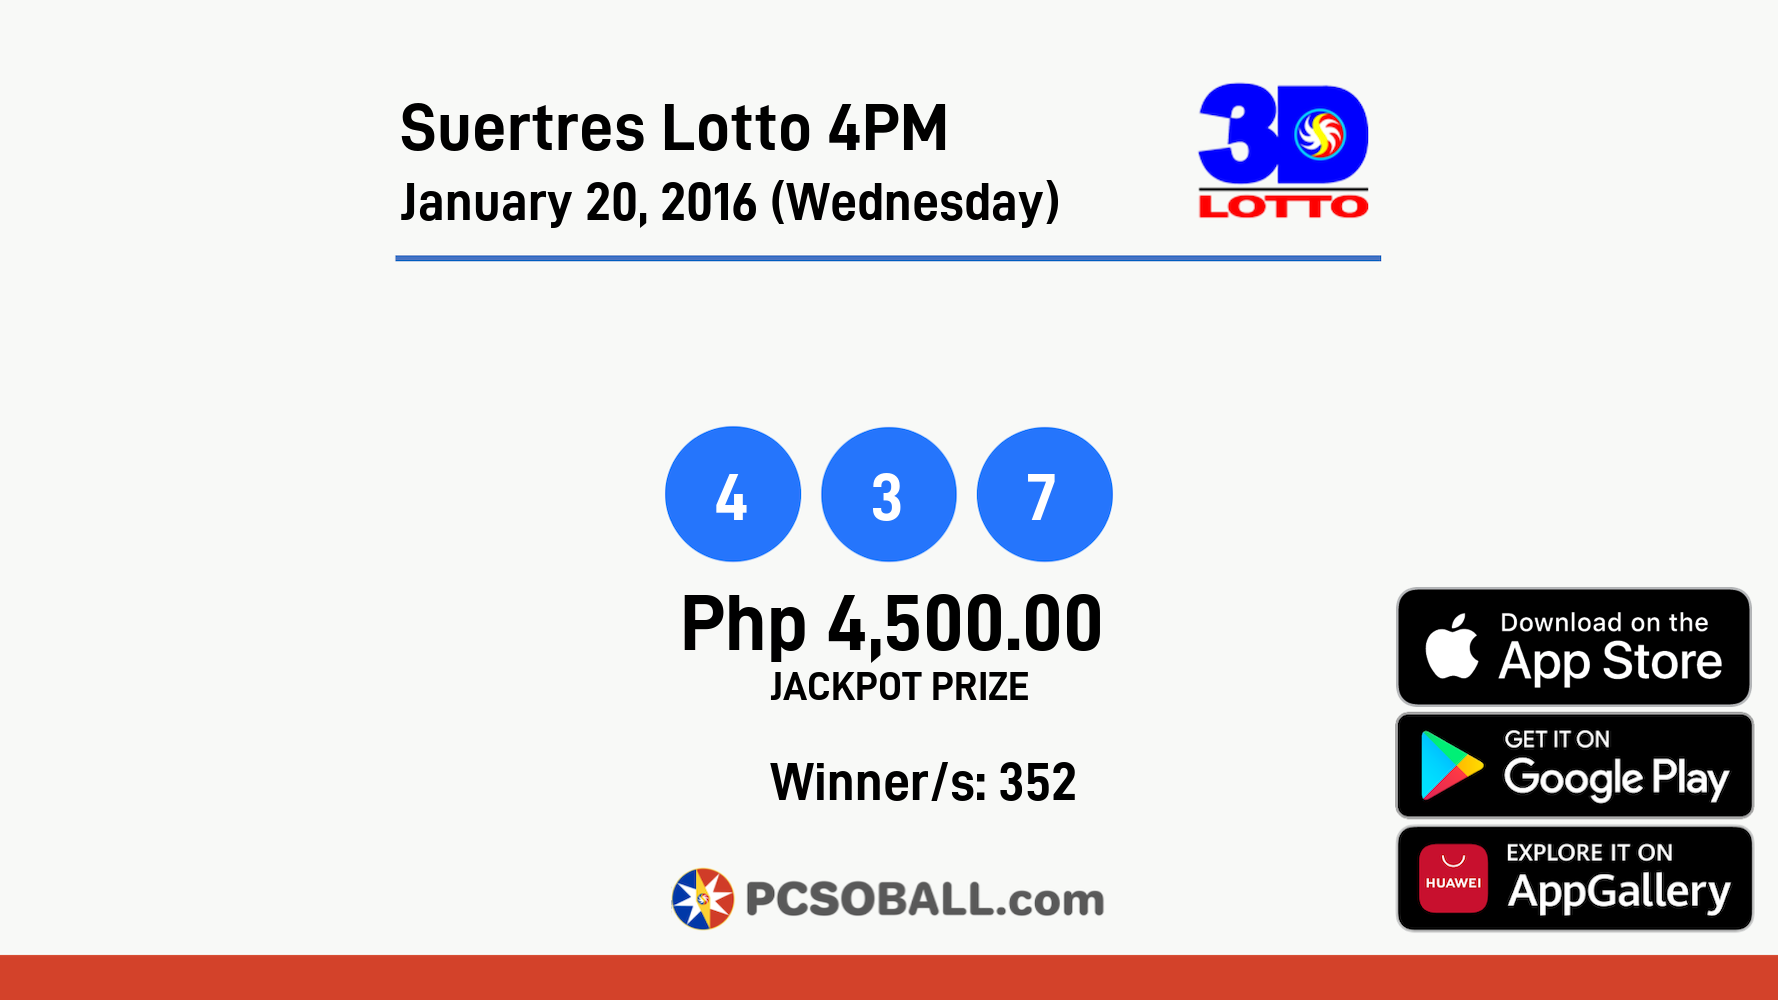 Suertres Lotto 4PM January 20, 2016 (Wednesday) Result